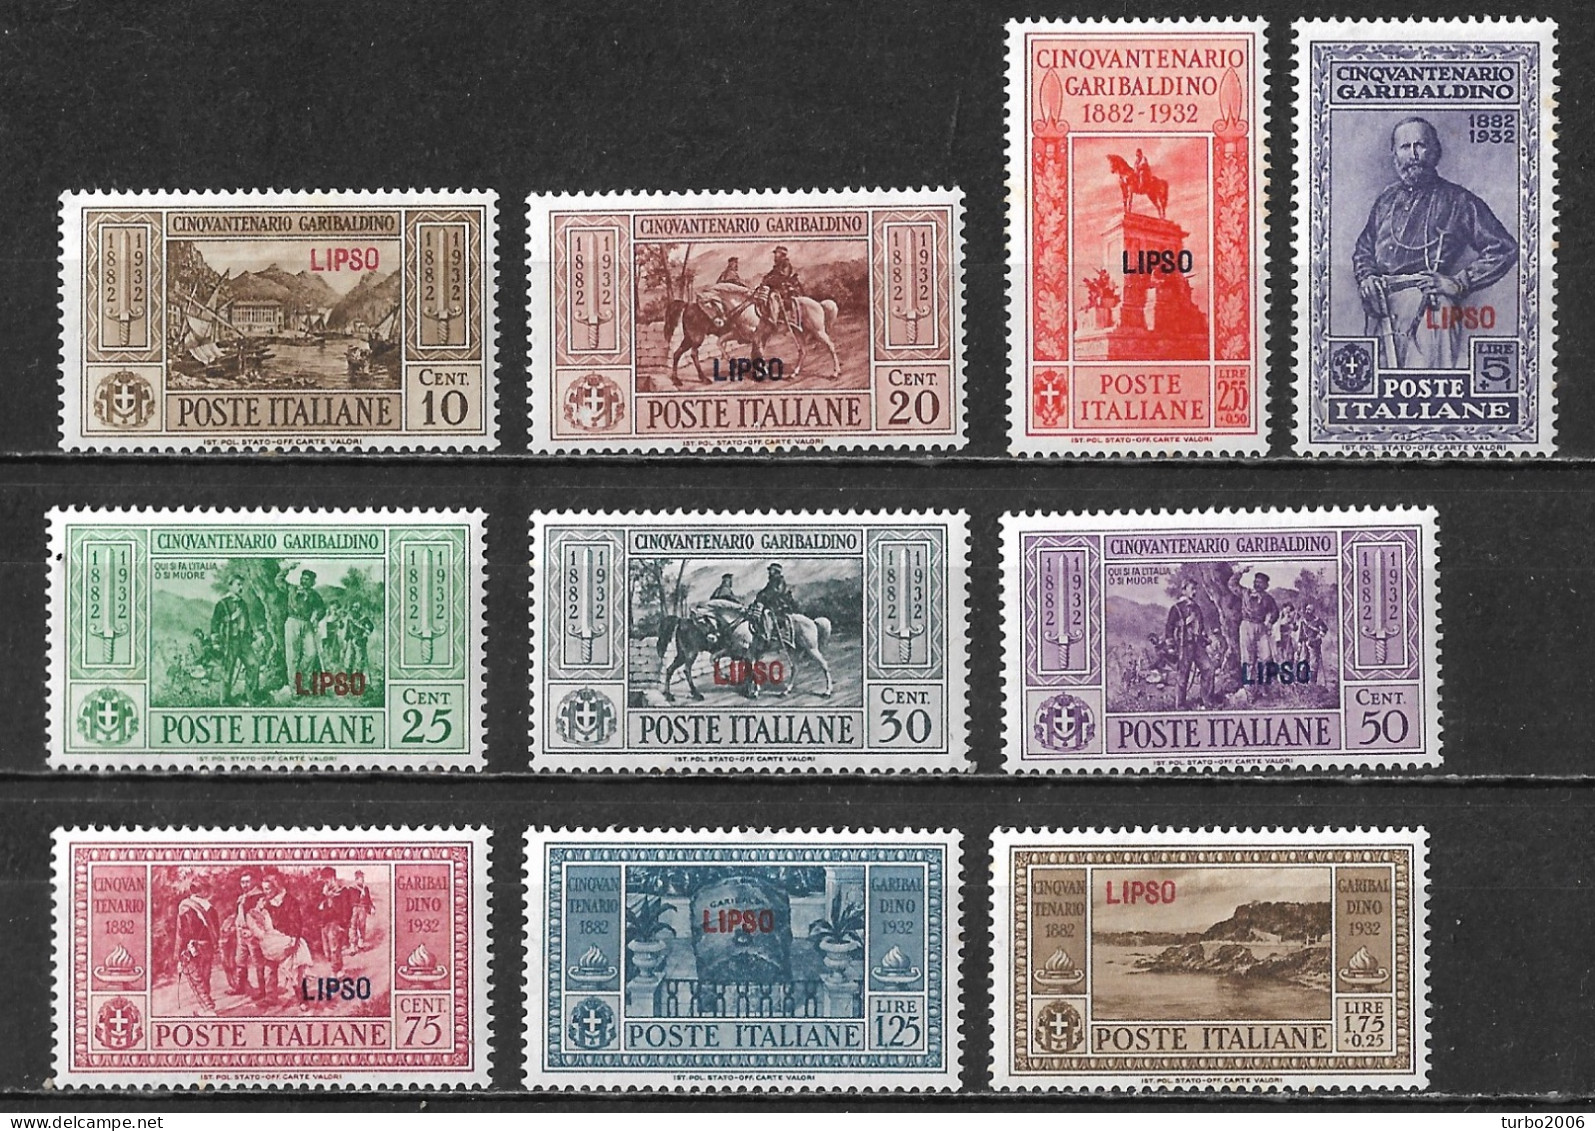 DODECANESE 1932 Stamps Of Italy Garibaldi Set With Overprint LIPSO Complete MH Set Vl. 17 / 26 - Dodécanèse